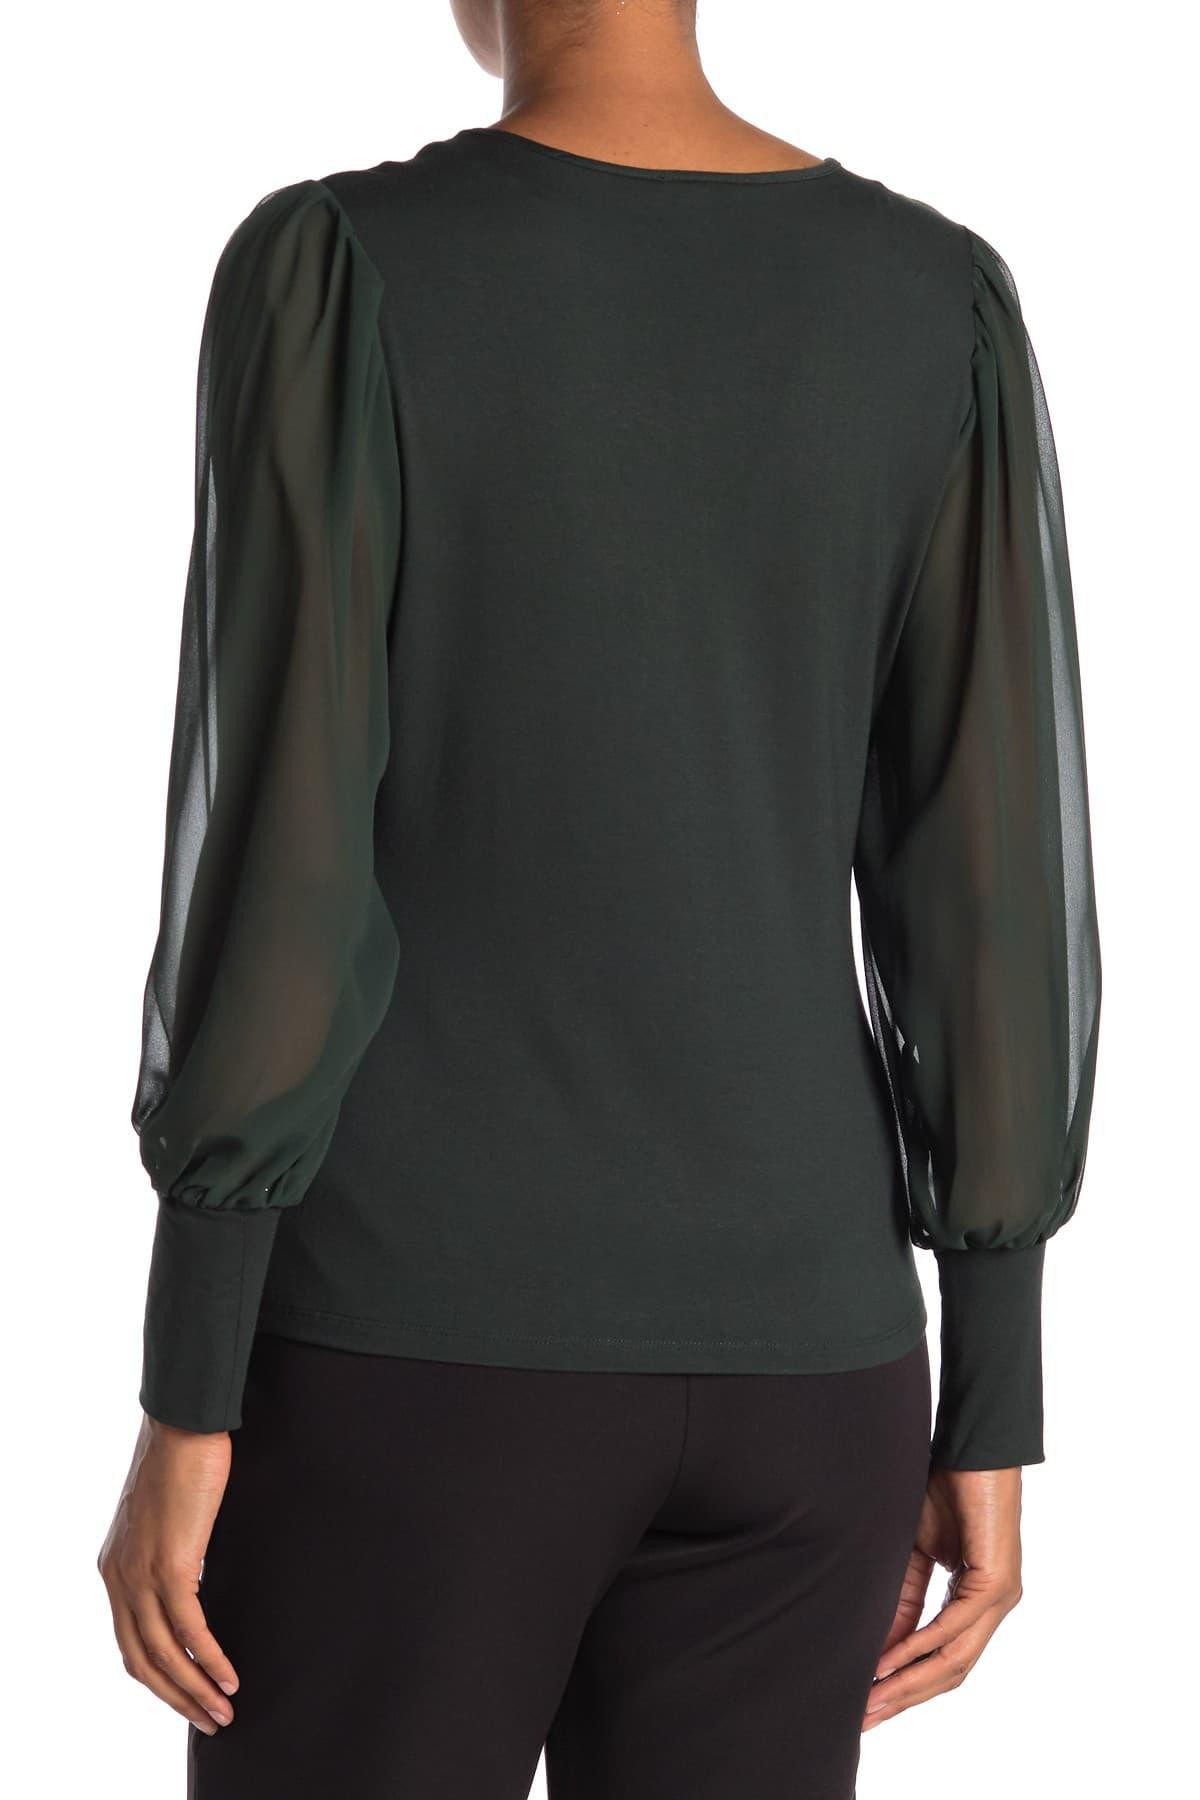 Vince Camuto Mixed Media Chiffon Long Sleeve Blouse in Black | Lyst